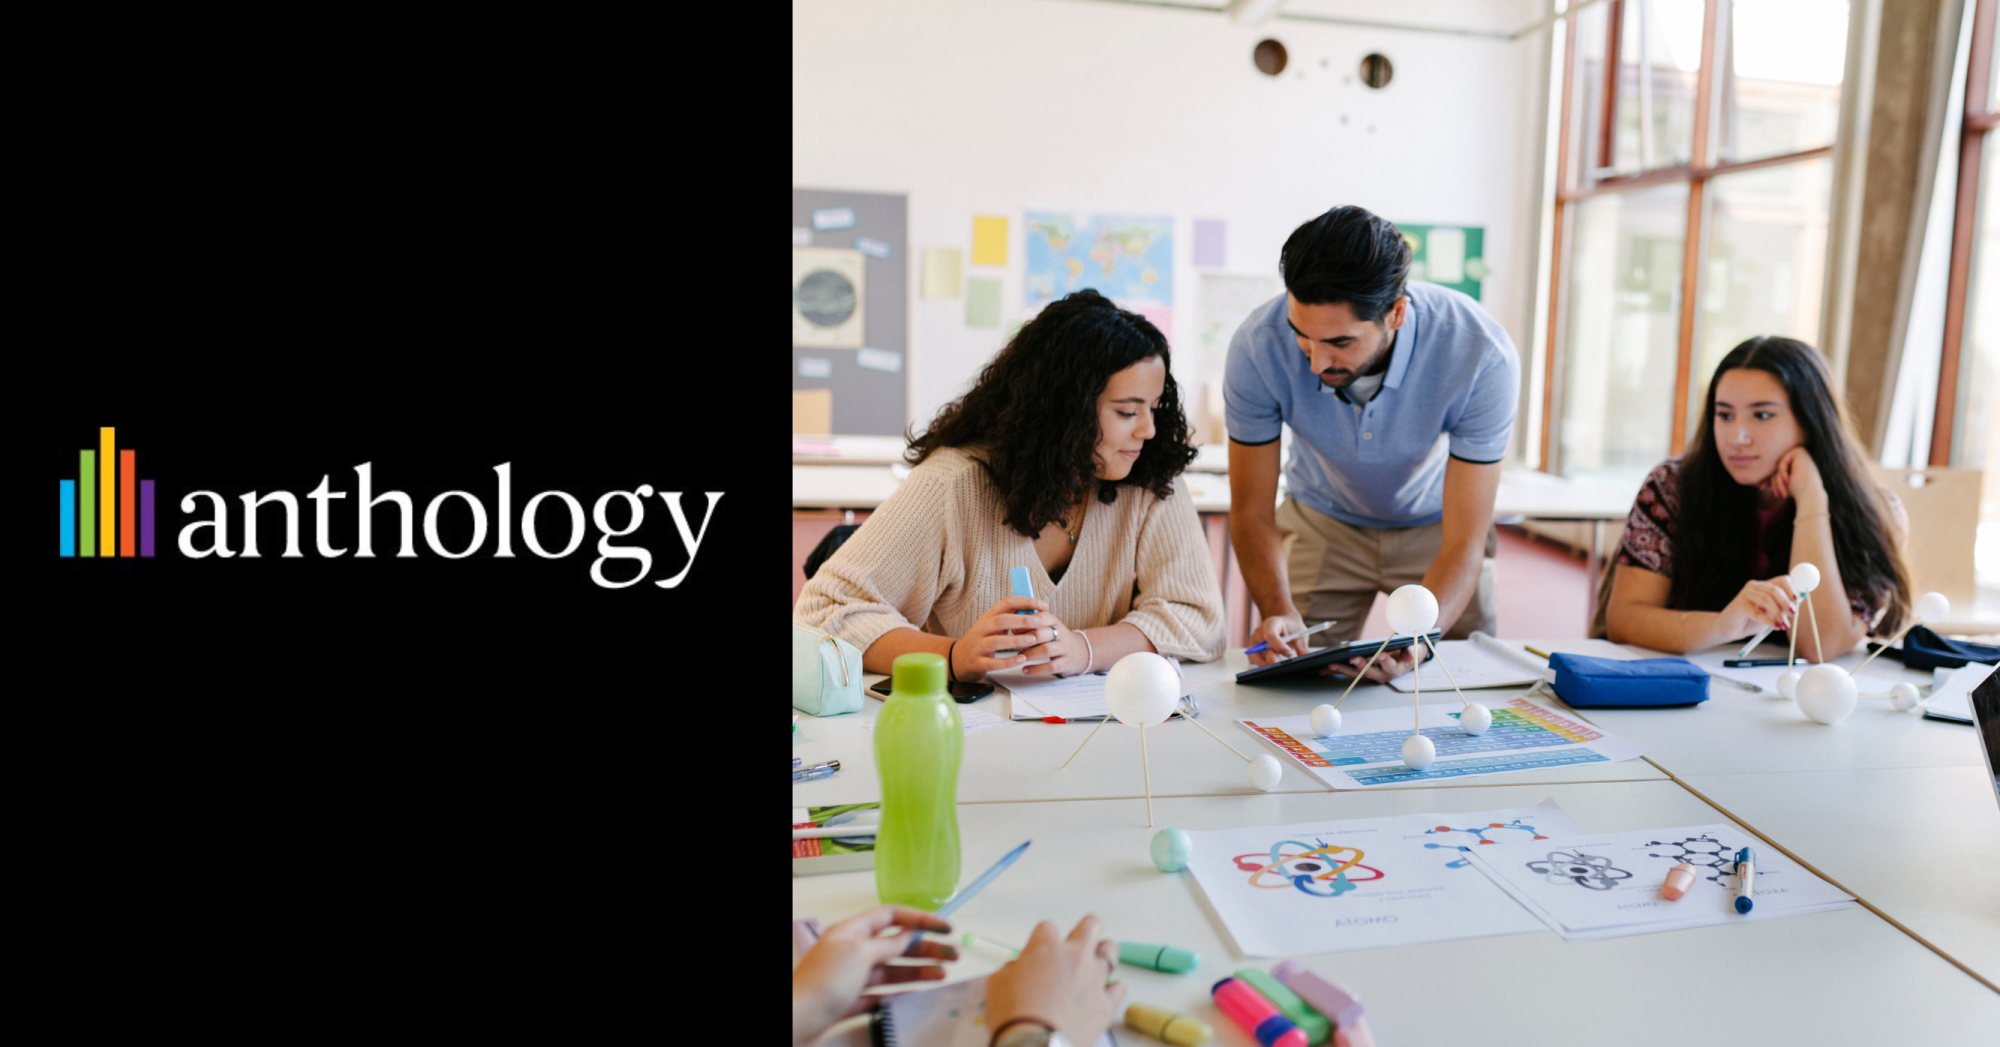 Anthology Certifies ADA University as their first Center of Excellence in Digital Teaching and Learning